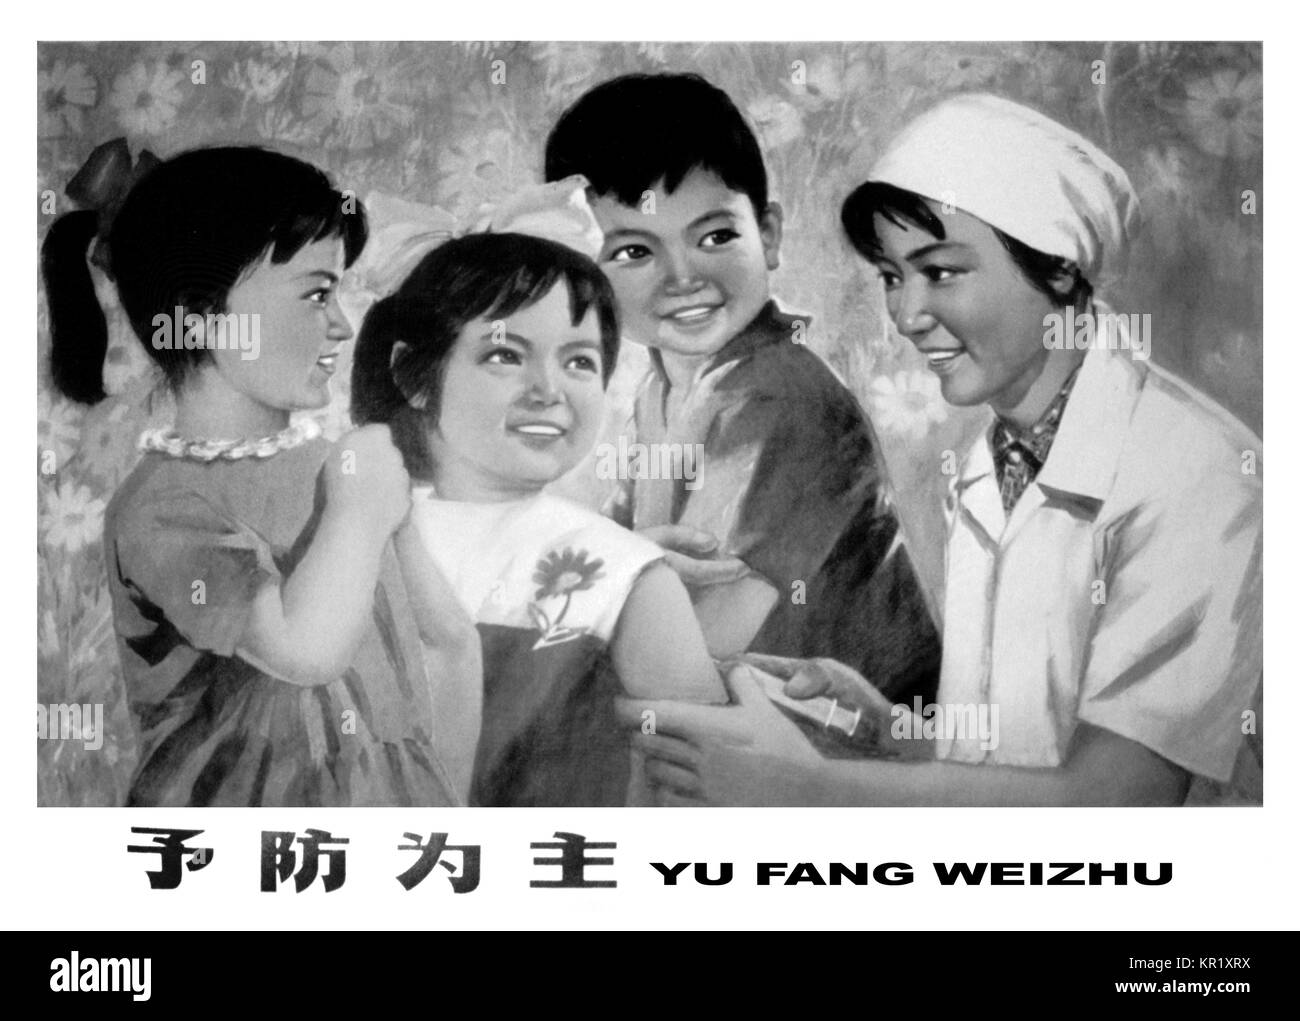 Early pre-1979 Asian poster promoting youth vaccination for Smallpox and Measles, 1973. This poster is part of a series of posters collected throughout the world on smallpox and/or measles vaccination. By 1979 the world was declared smallpox-free. Image courtesy CDC. Stock Photo